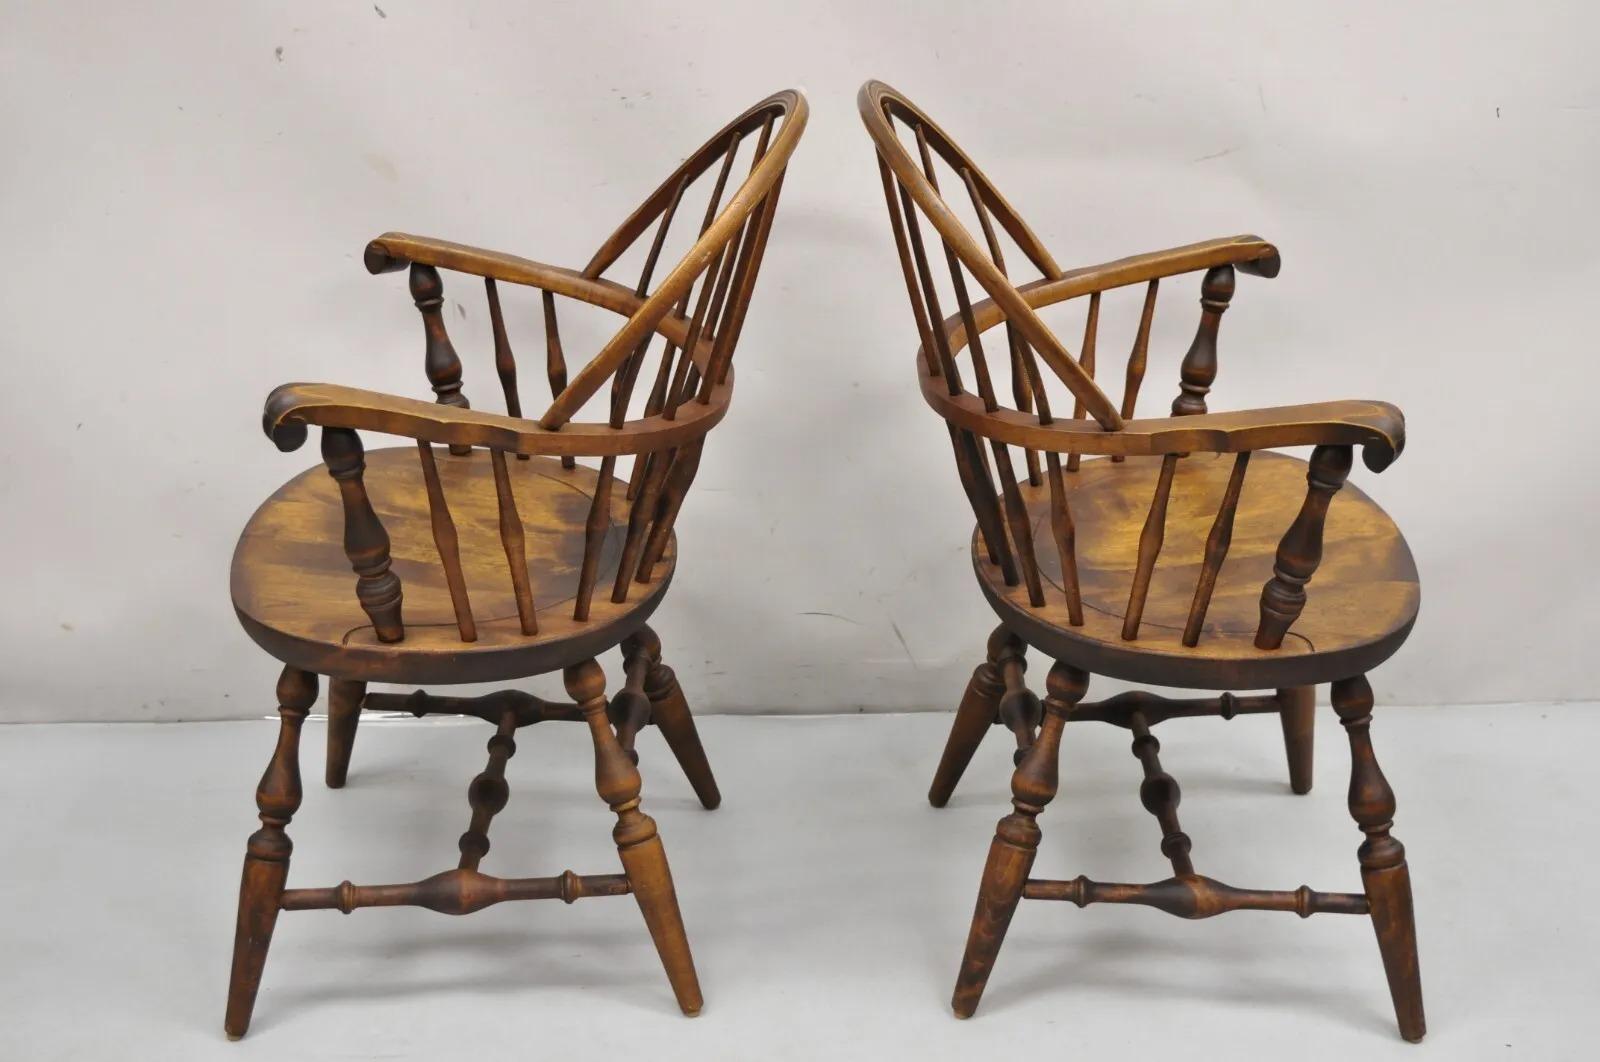 Nichols & Stone Rock Maple Wood Bowback Colonial Windsor Arm Chairs - a Pair For Sale 4